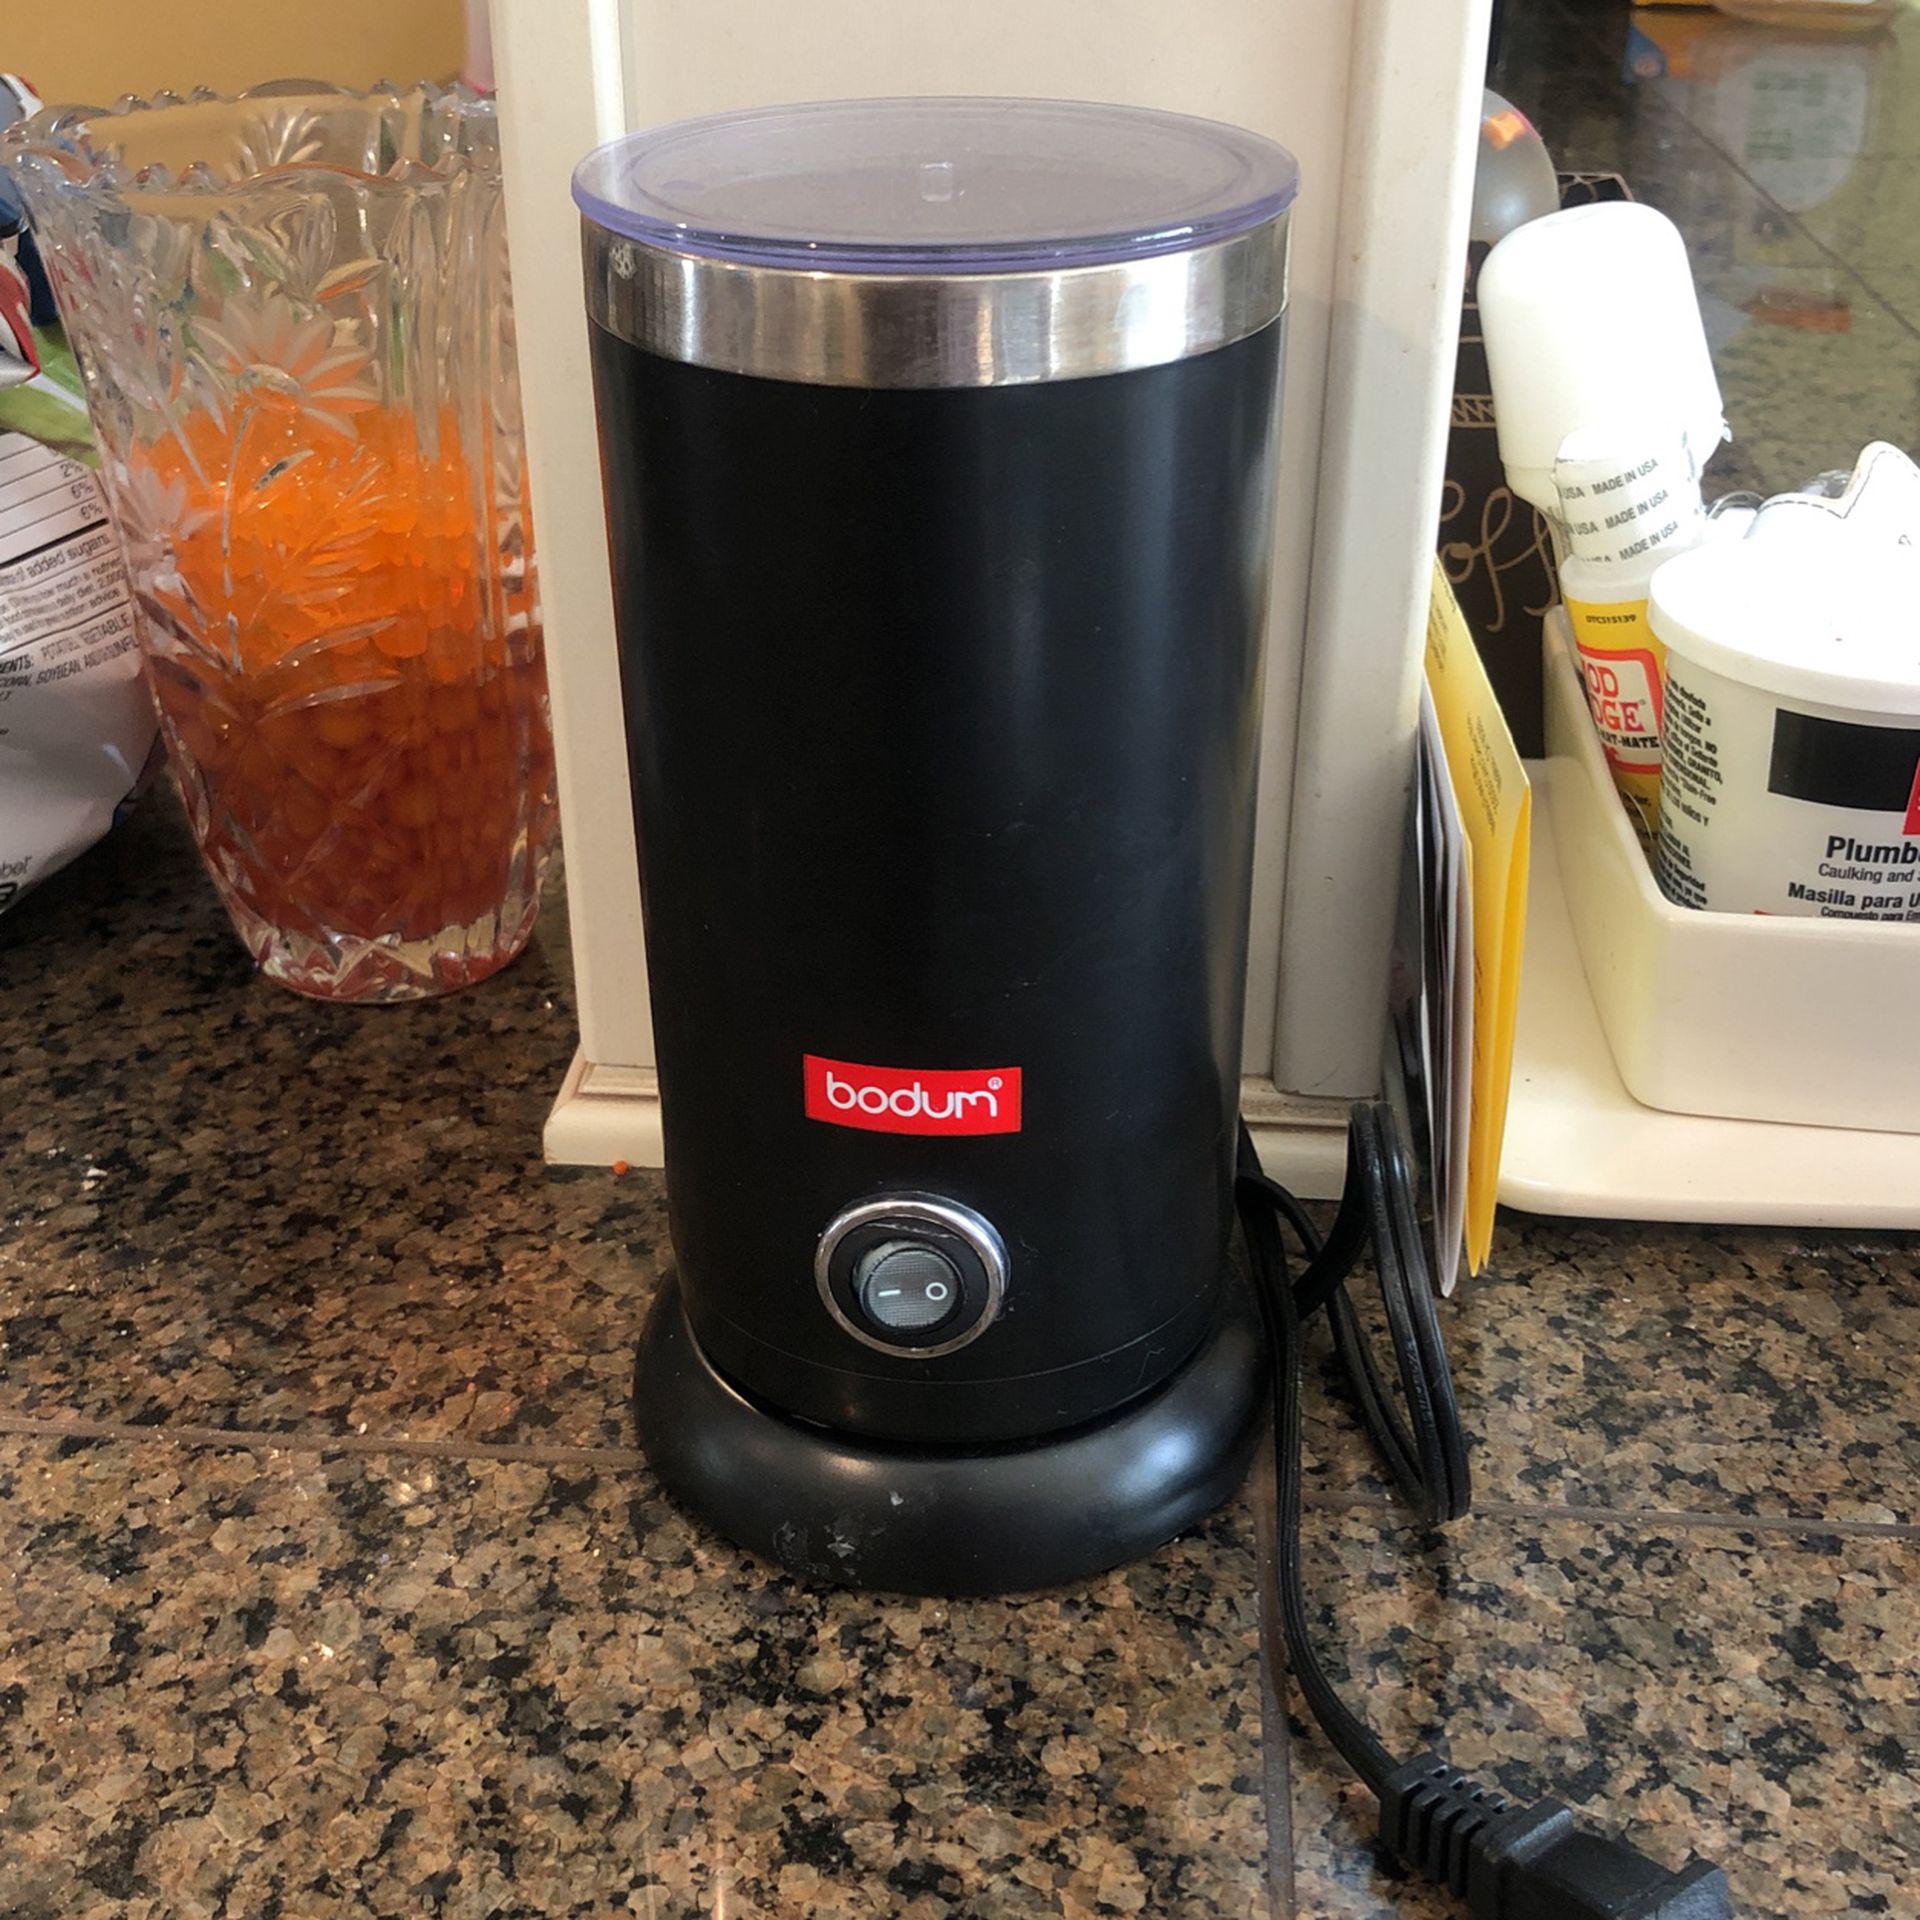 Bonjour Milk Frother for Sale in Lomita, CA - OfferUp